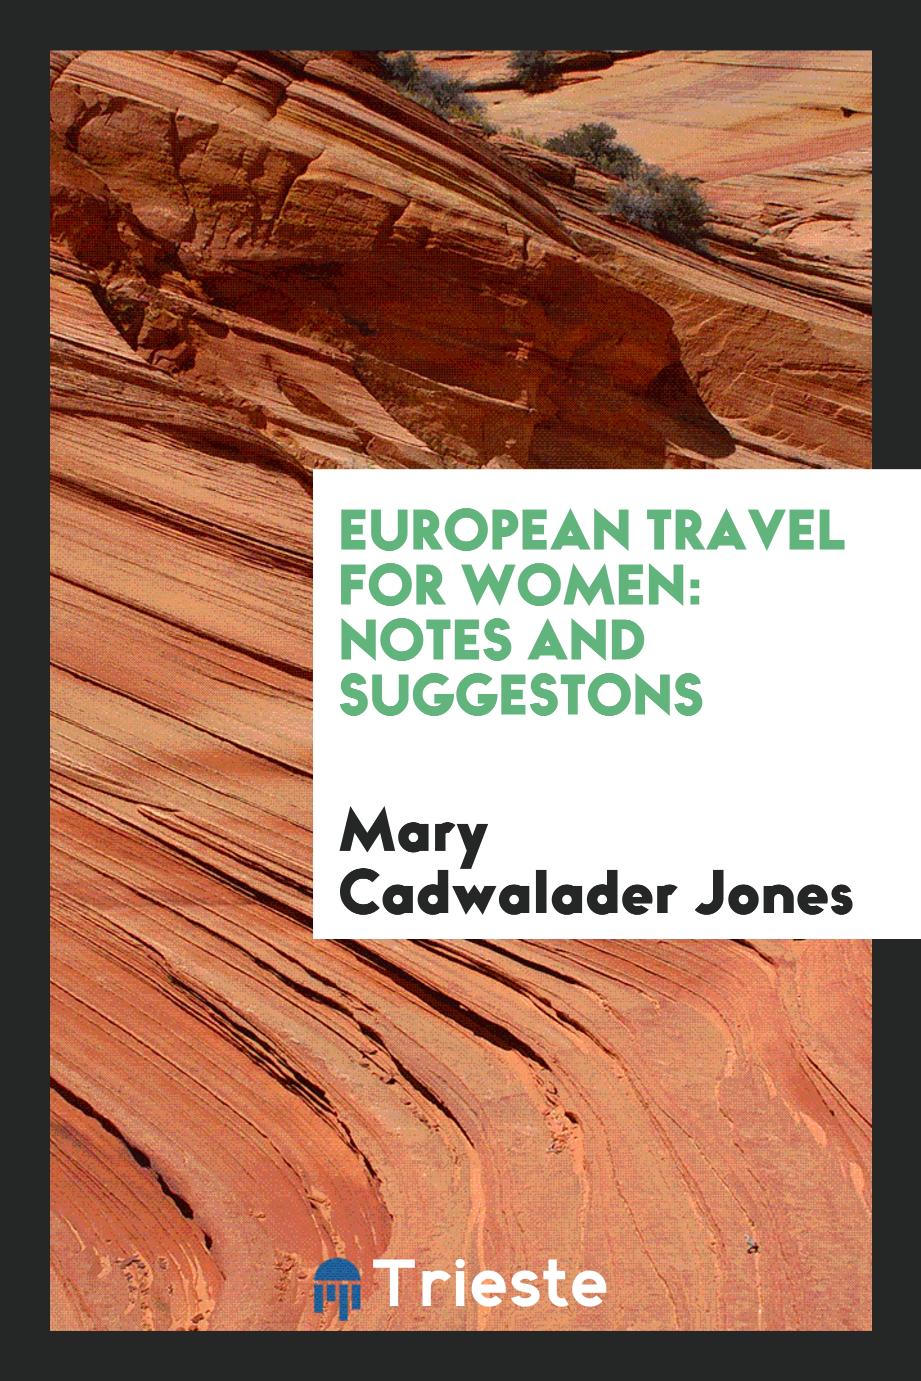 European Travel for Women: Notes and Suggestons